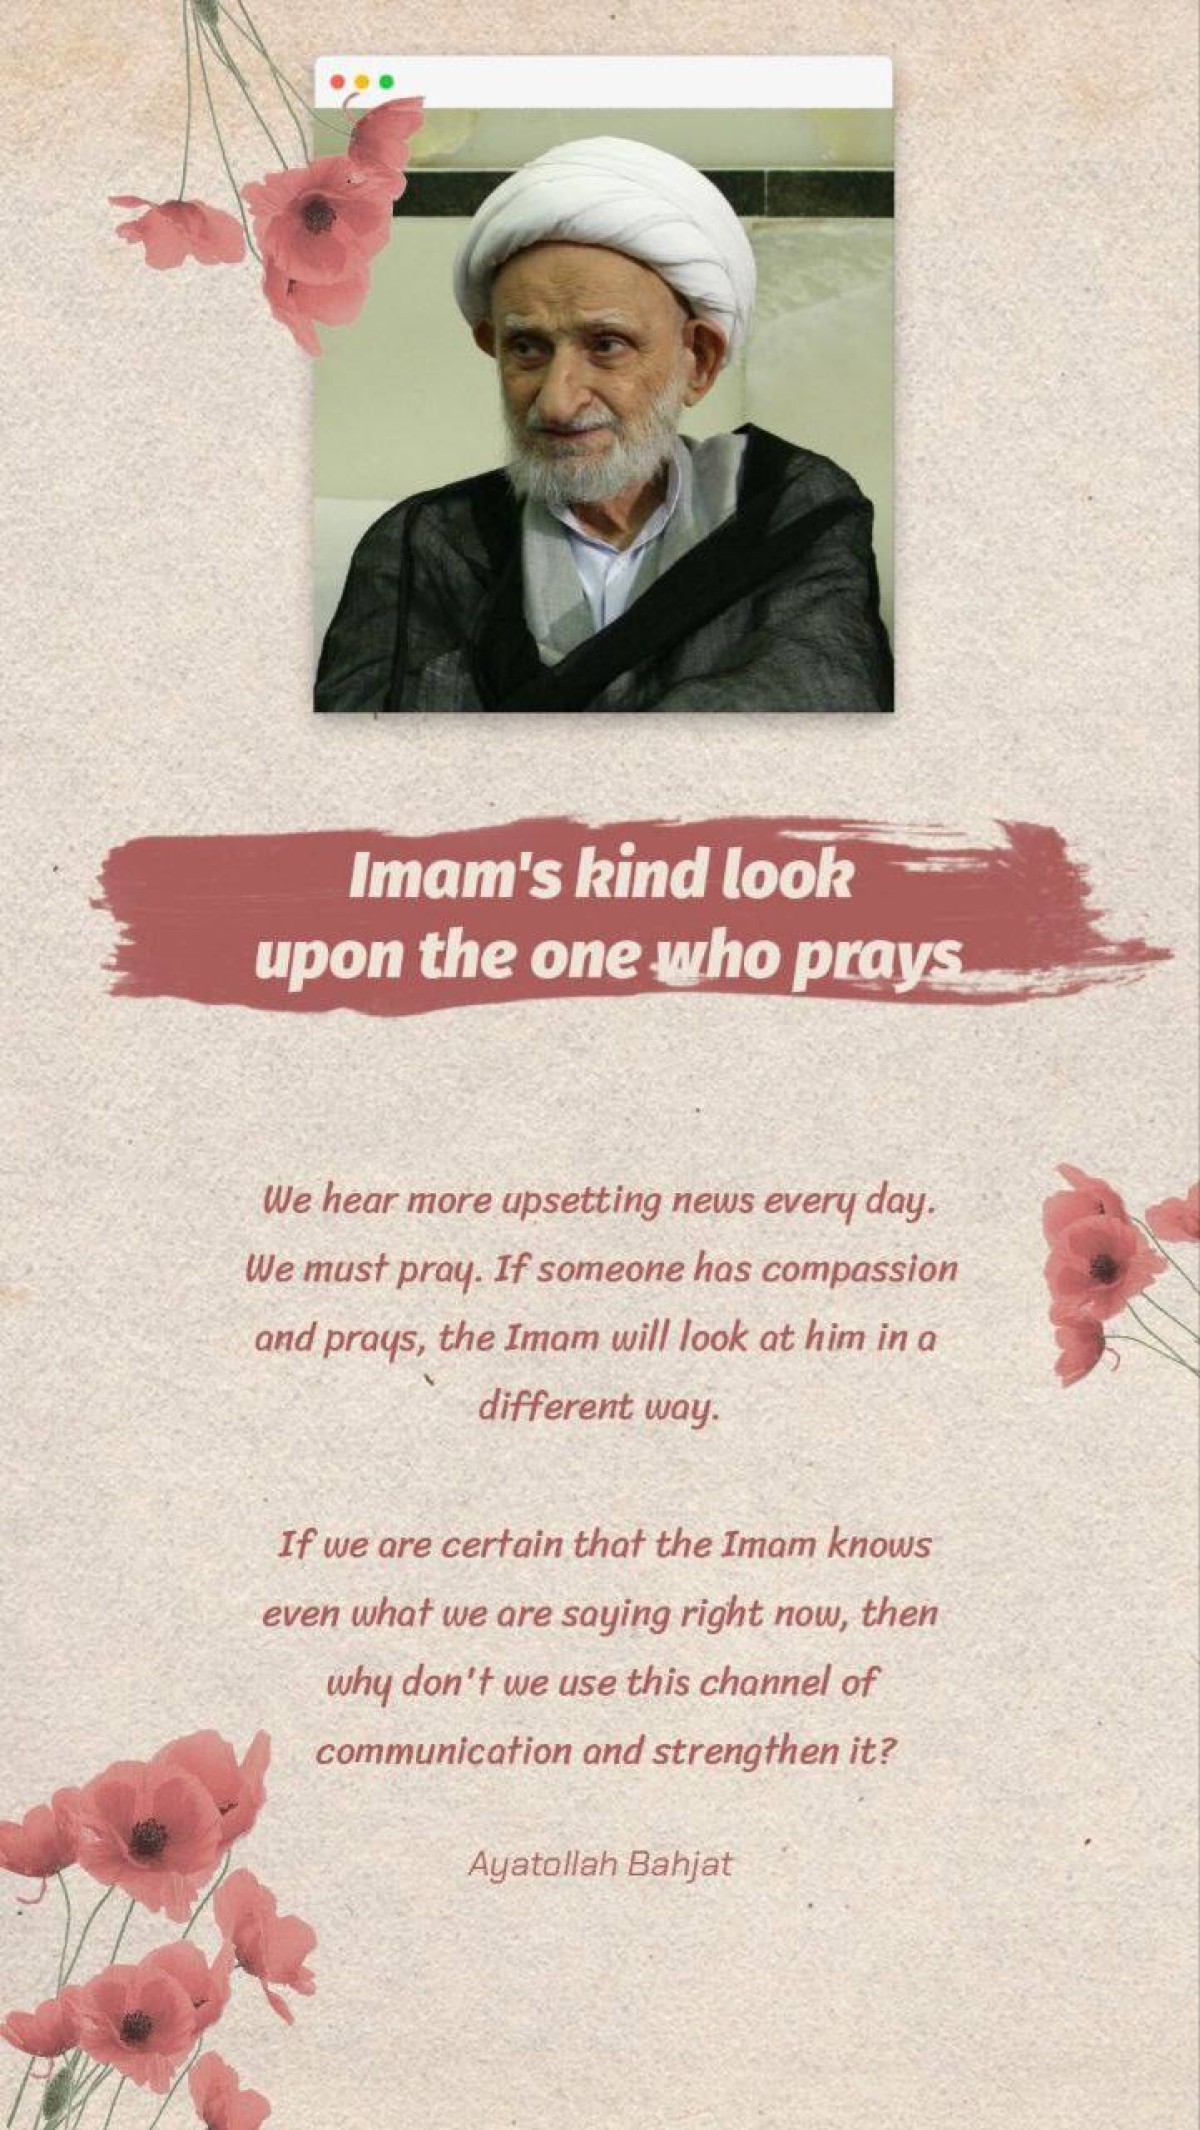 Imam's kind look upon the one who prays